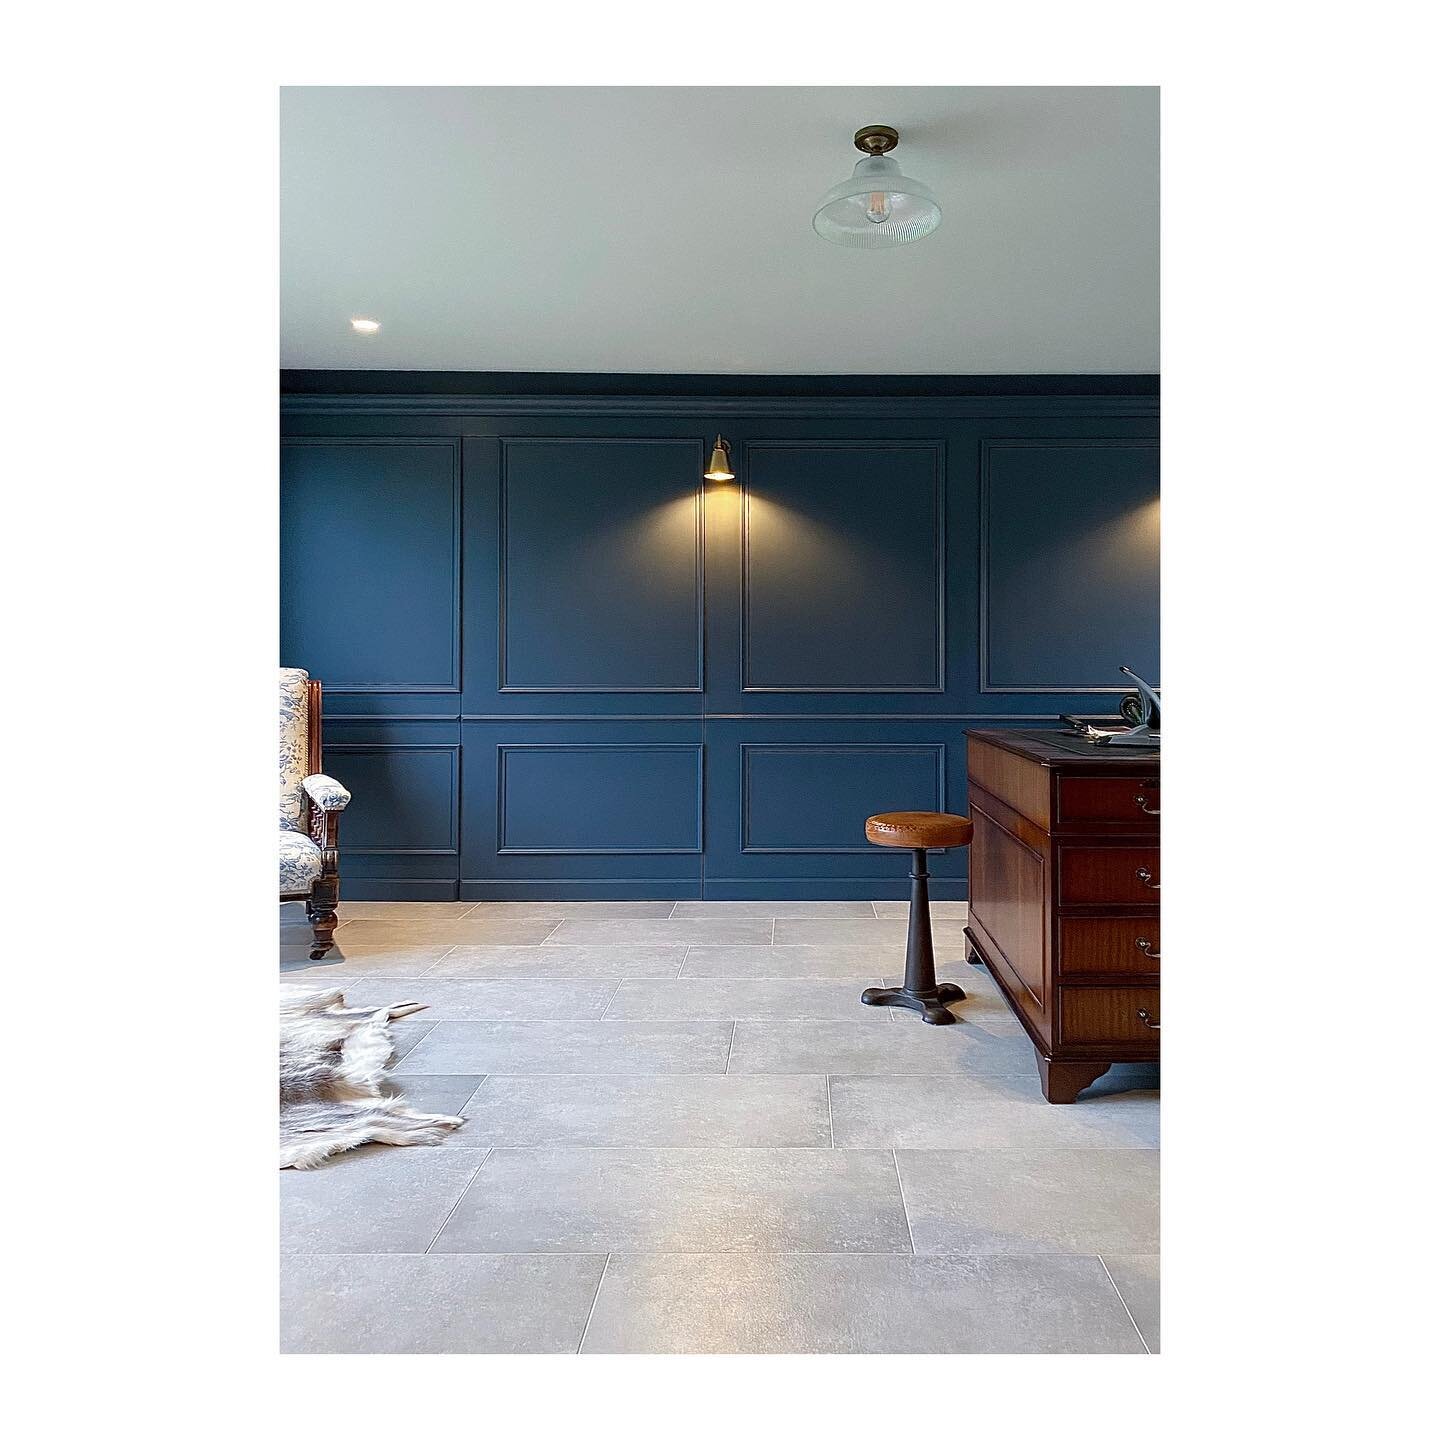 Part of the panelled wall in our recently completed study project. Each panel has storage behind and we&rsquo;ve also created a secret door through to boot room! Such a lovely project and clients..
.
.
.
.
#bespokestudy #interiordesign #bespokepannel